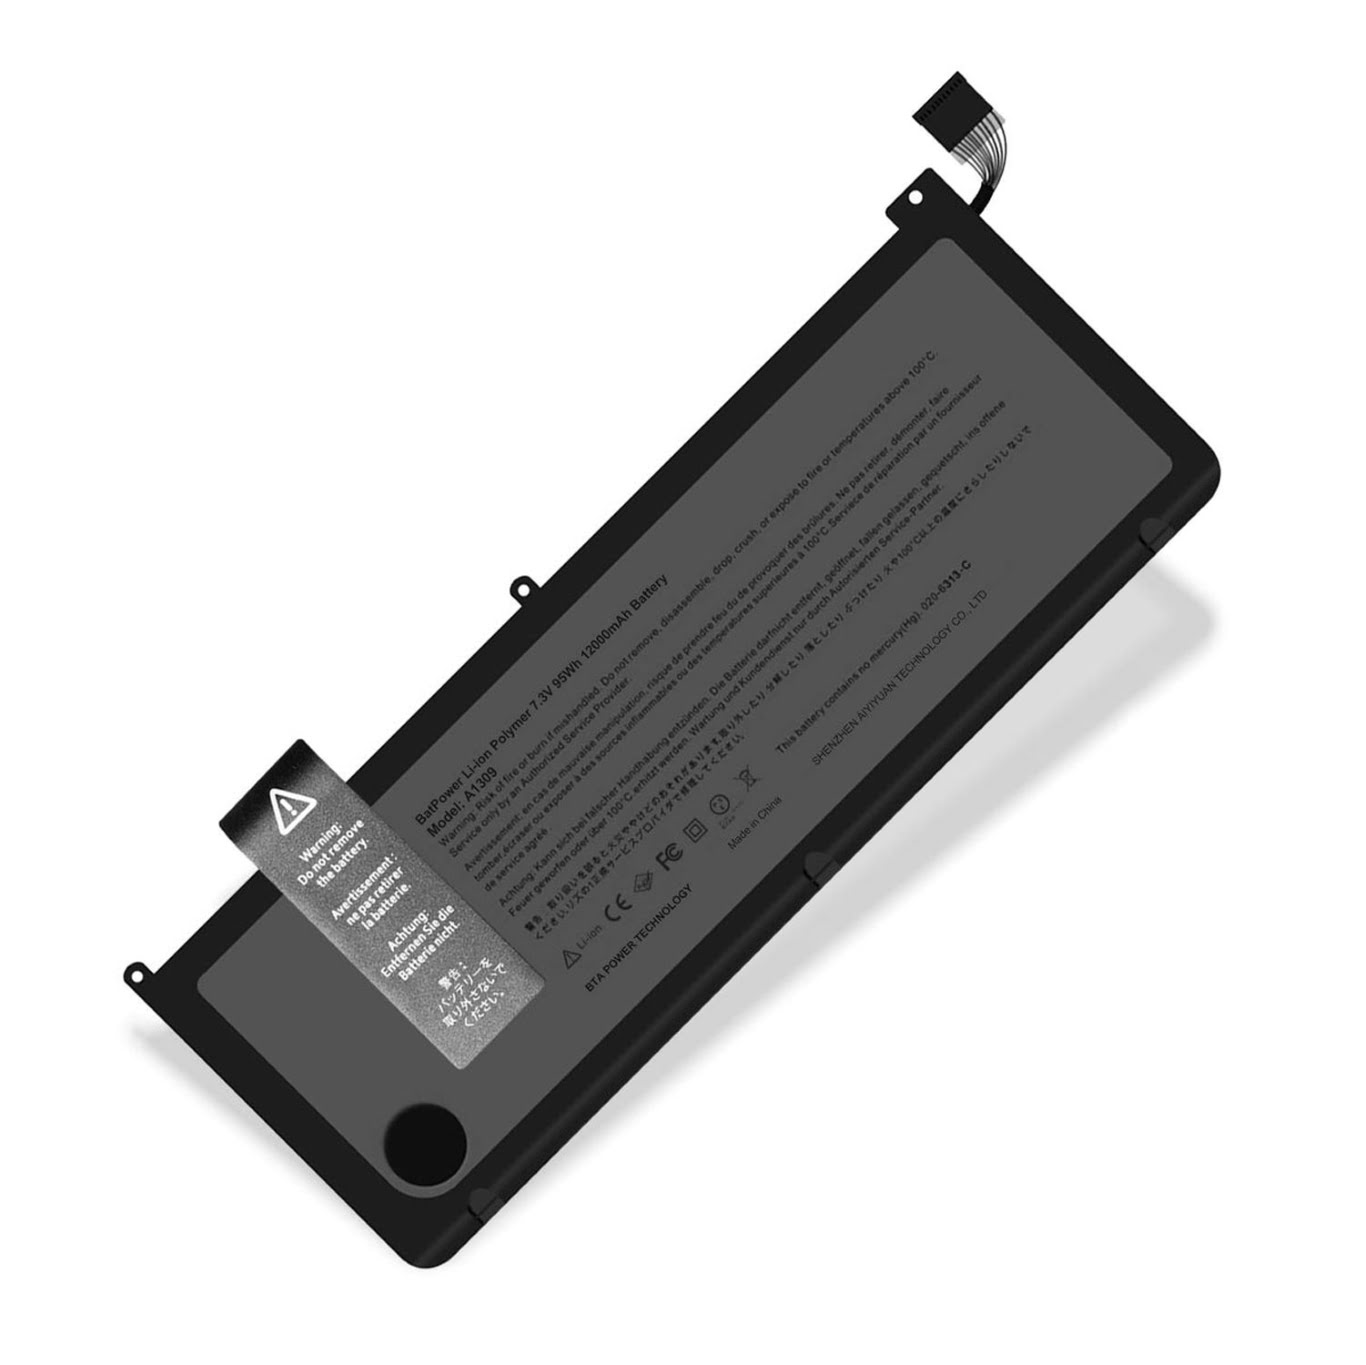 020-6313-C, 661-5037-A replacement Laptop Battery for Apple 2009 2010 Version), MacBook Pro 17